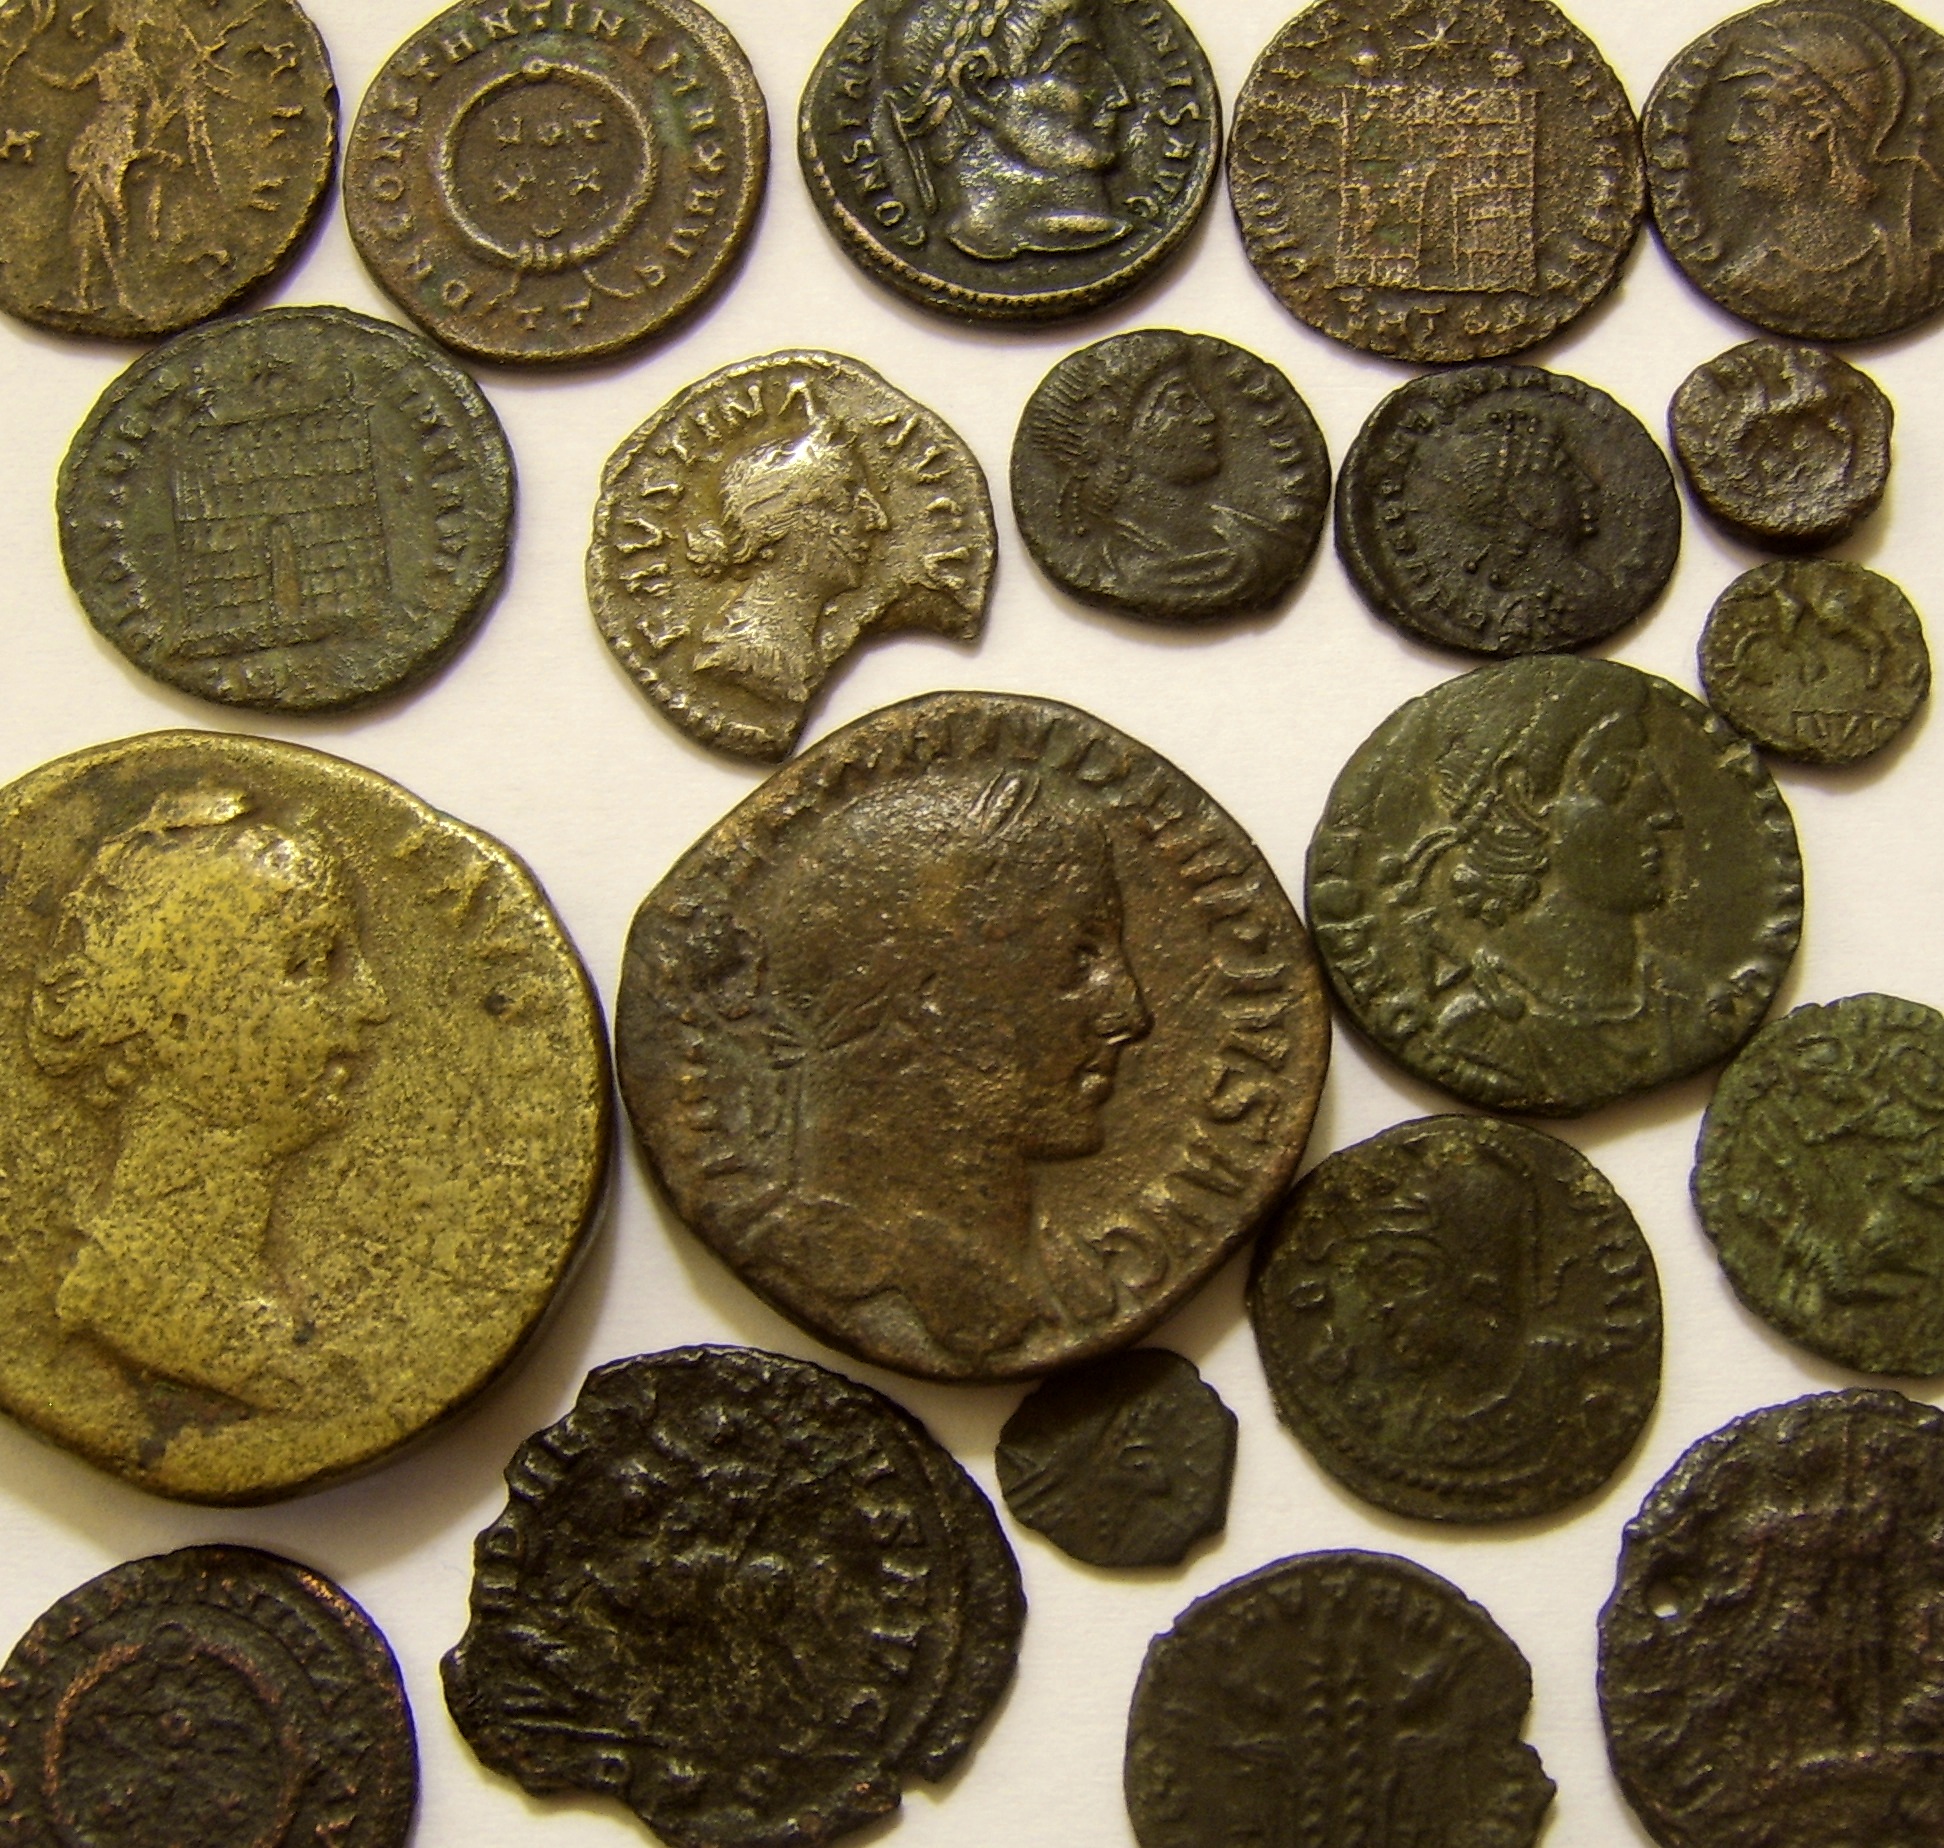 Rethinking the Coinage of Roman Britain